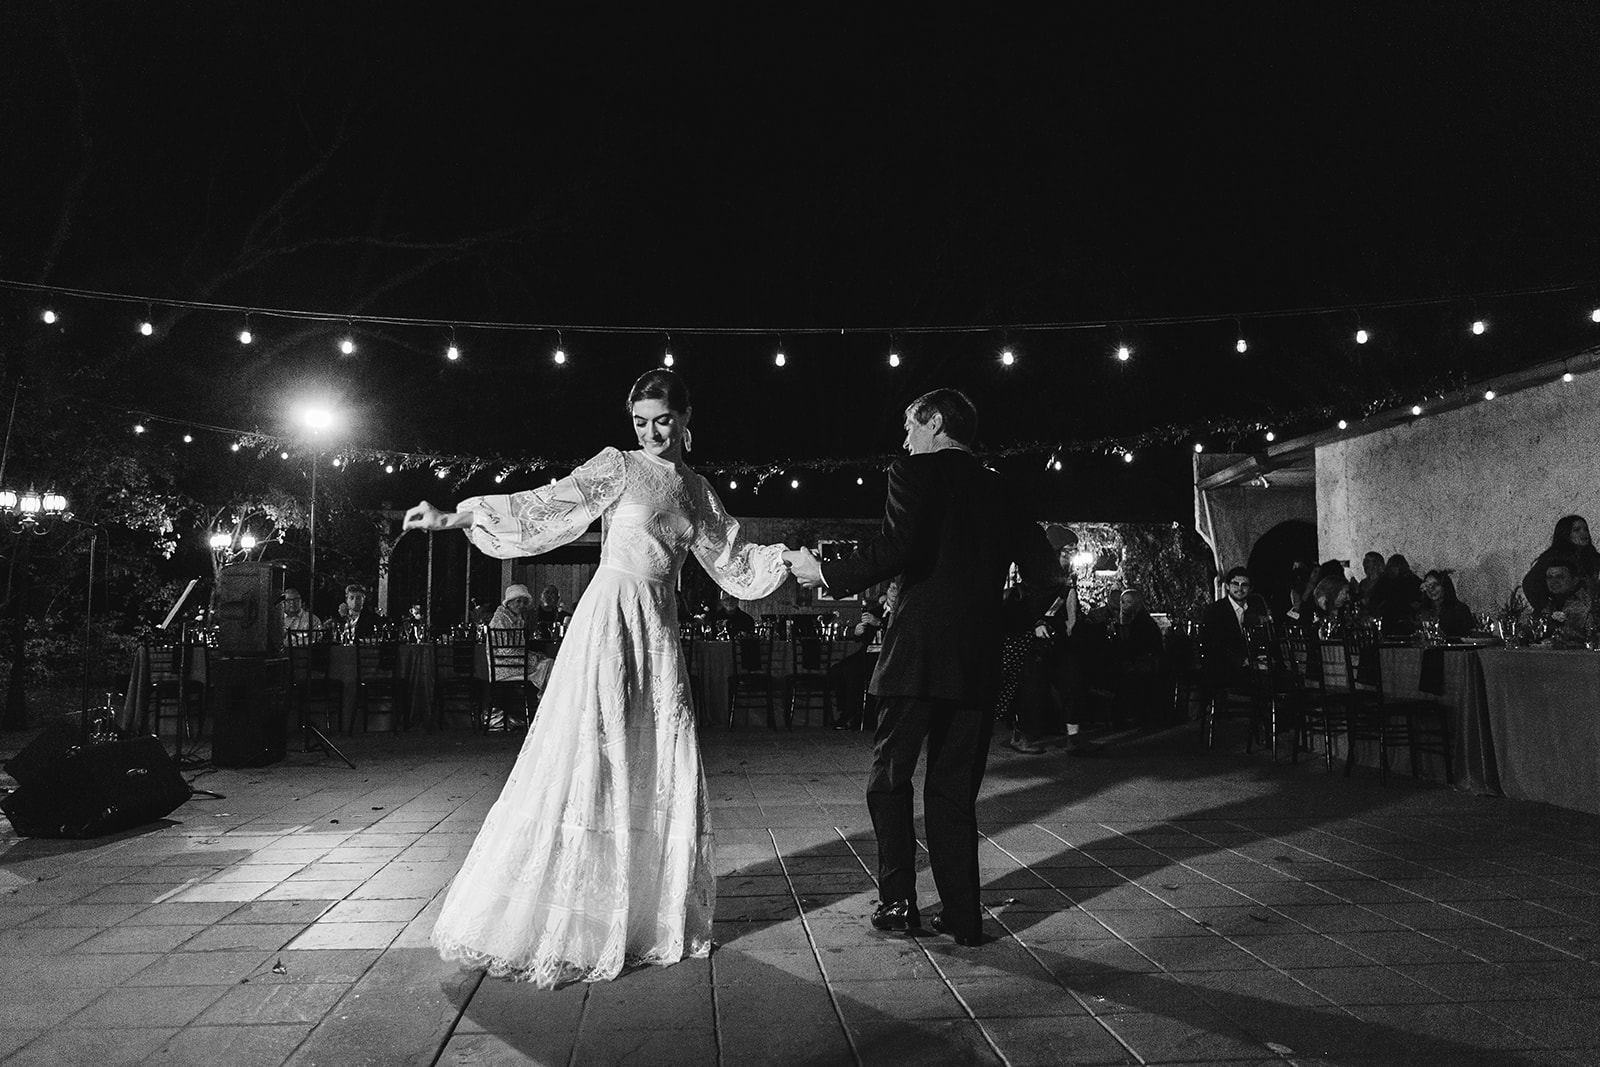 A black and white photo of a bride and groom sharing their first dance.